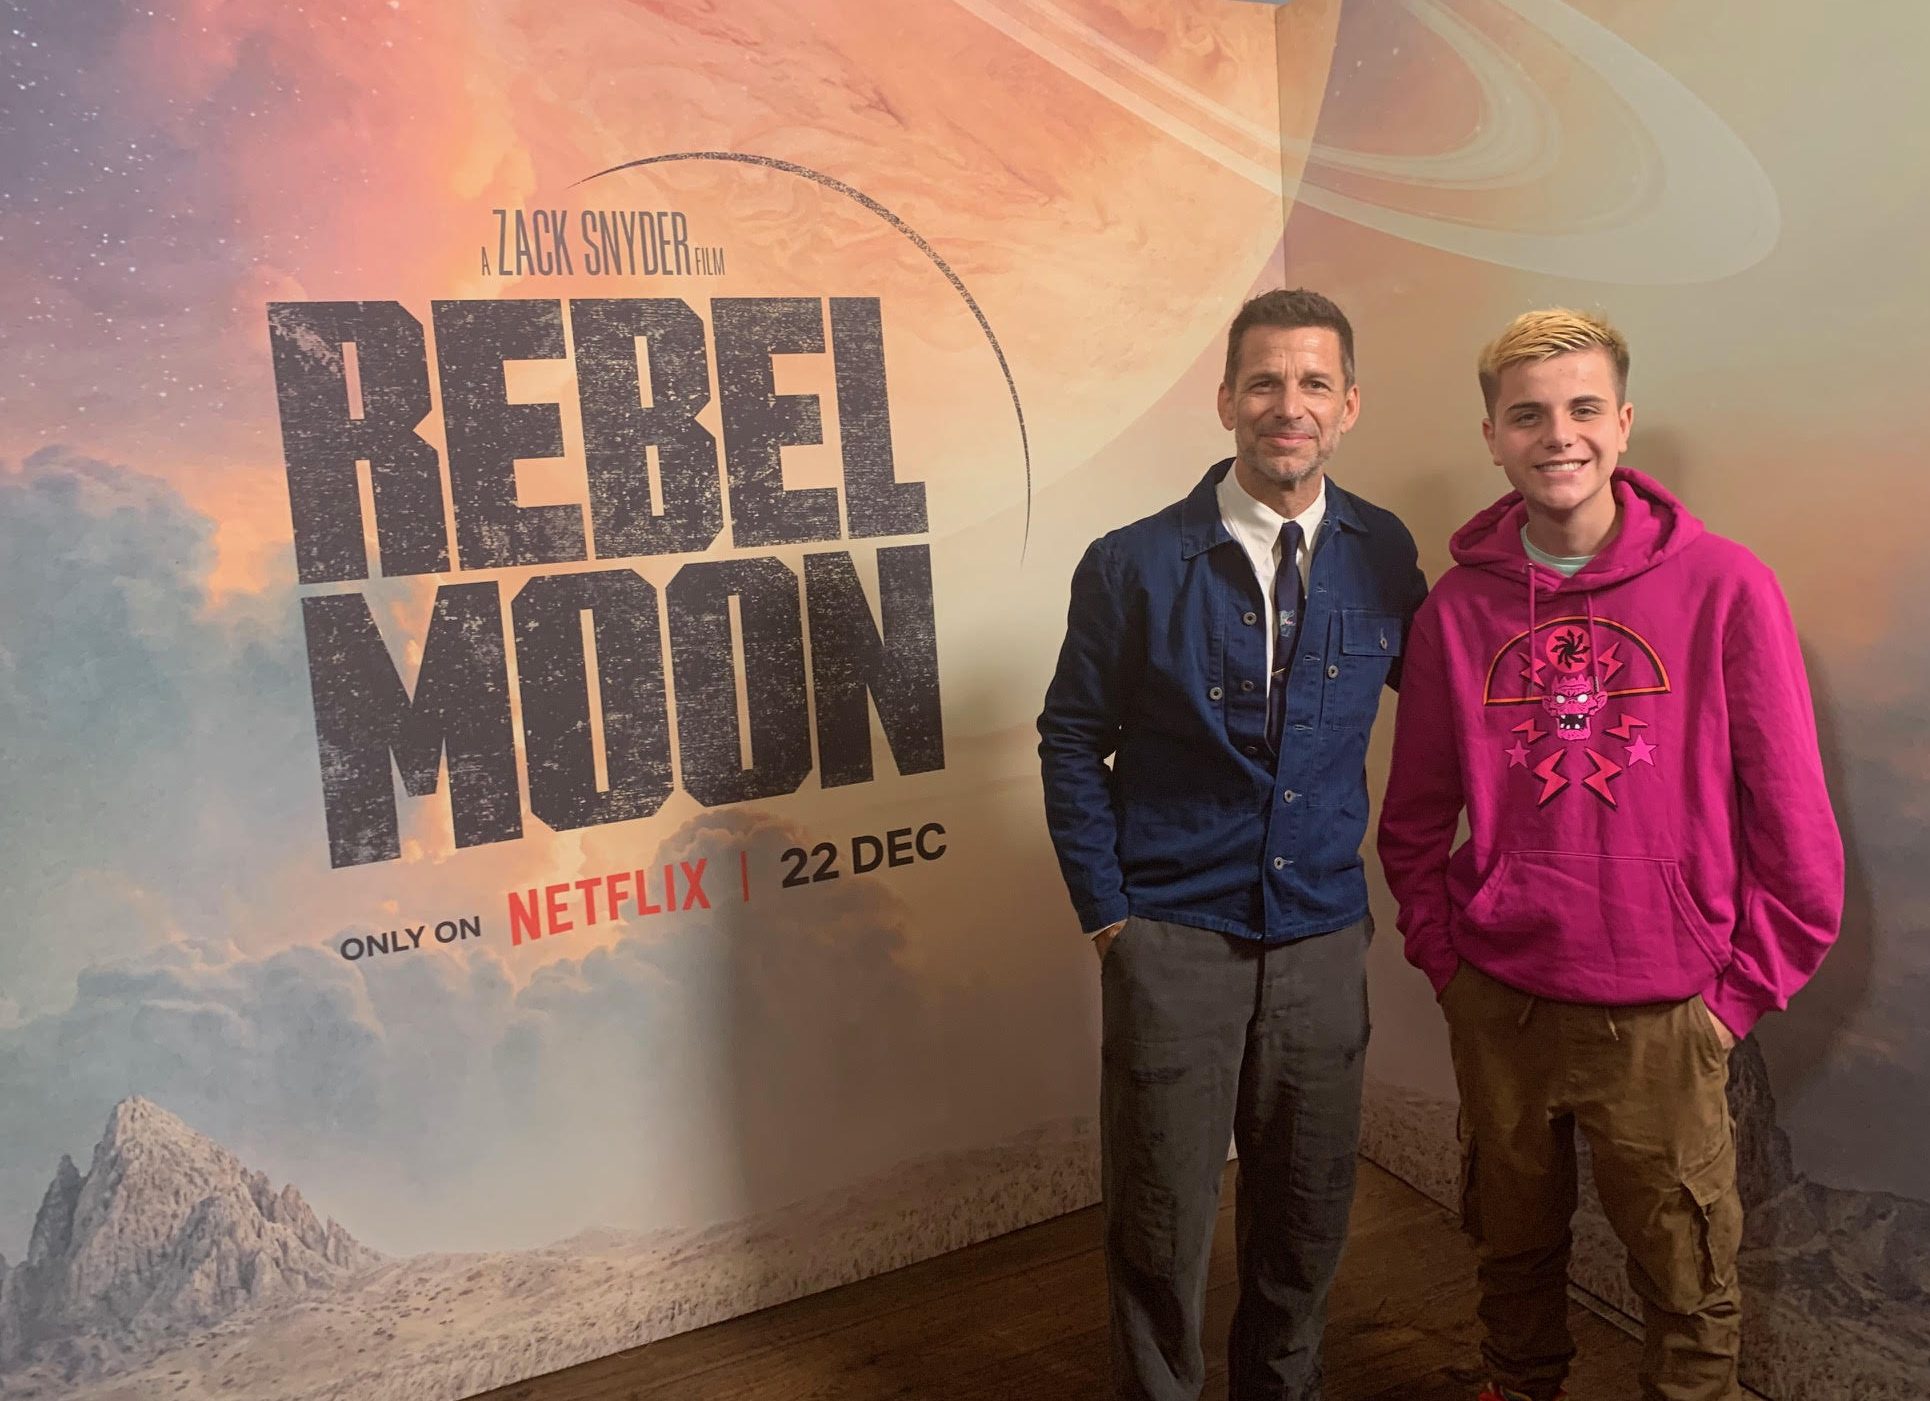 Zack Snyder's Rebel Moon Netflix release date out